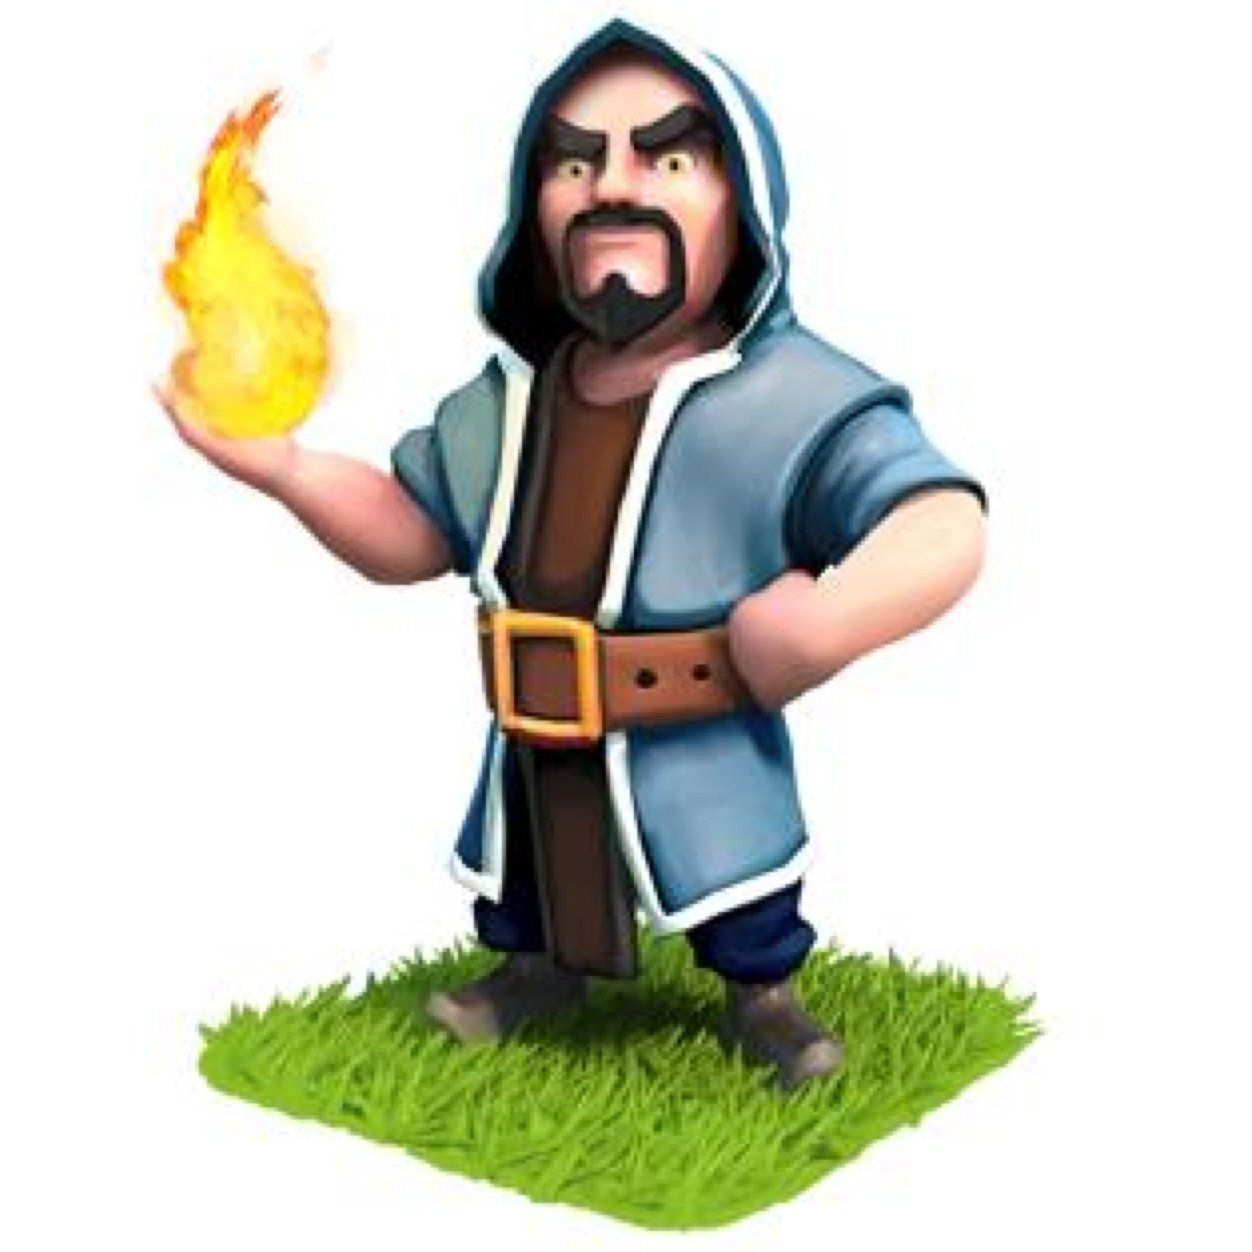 Wizard From Clash Royale